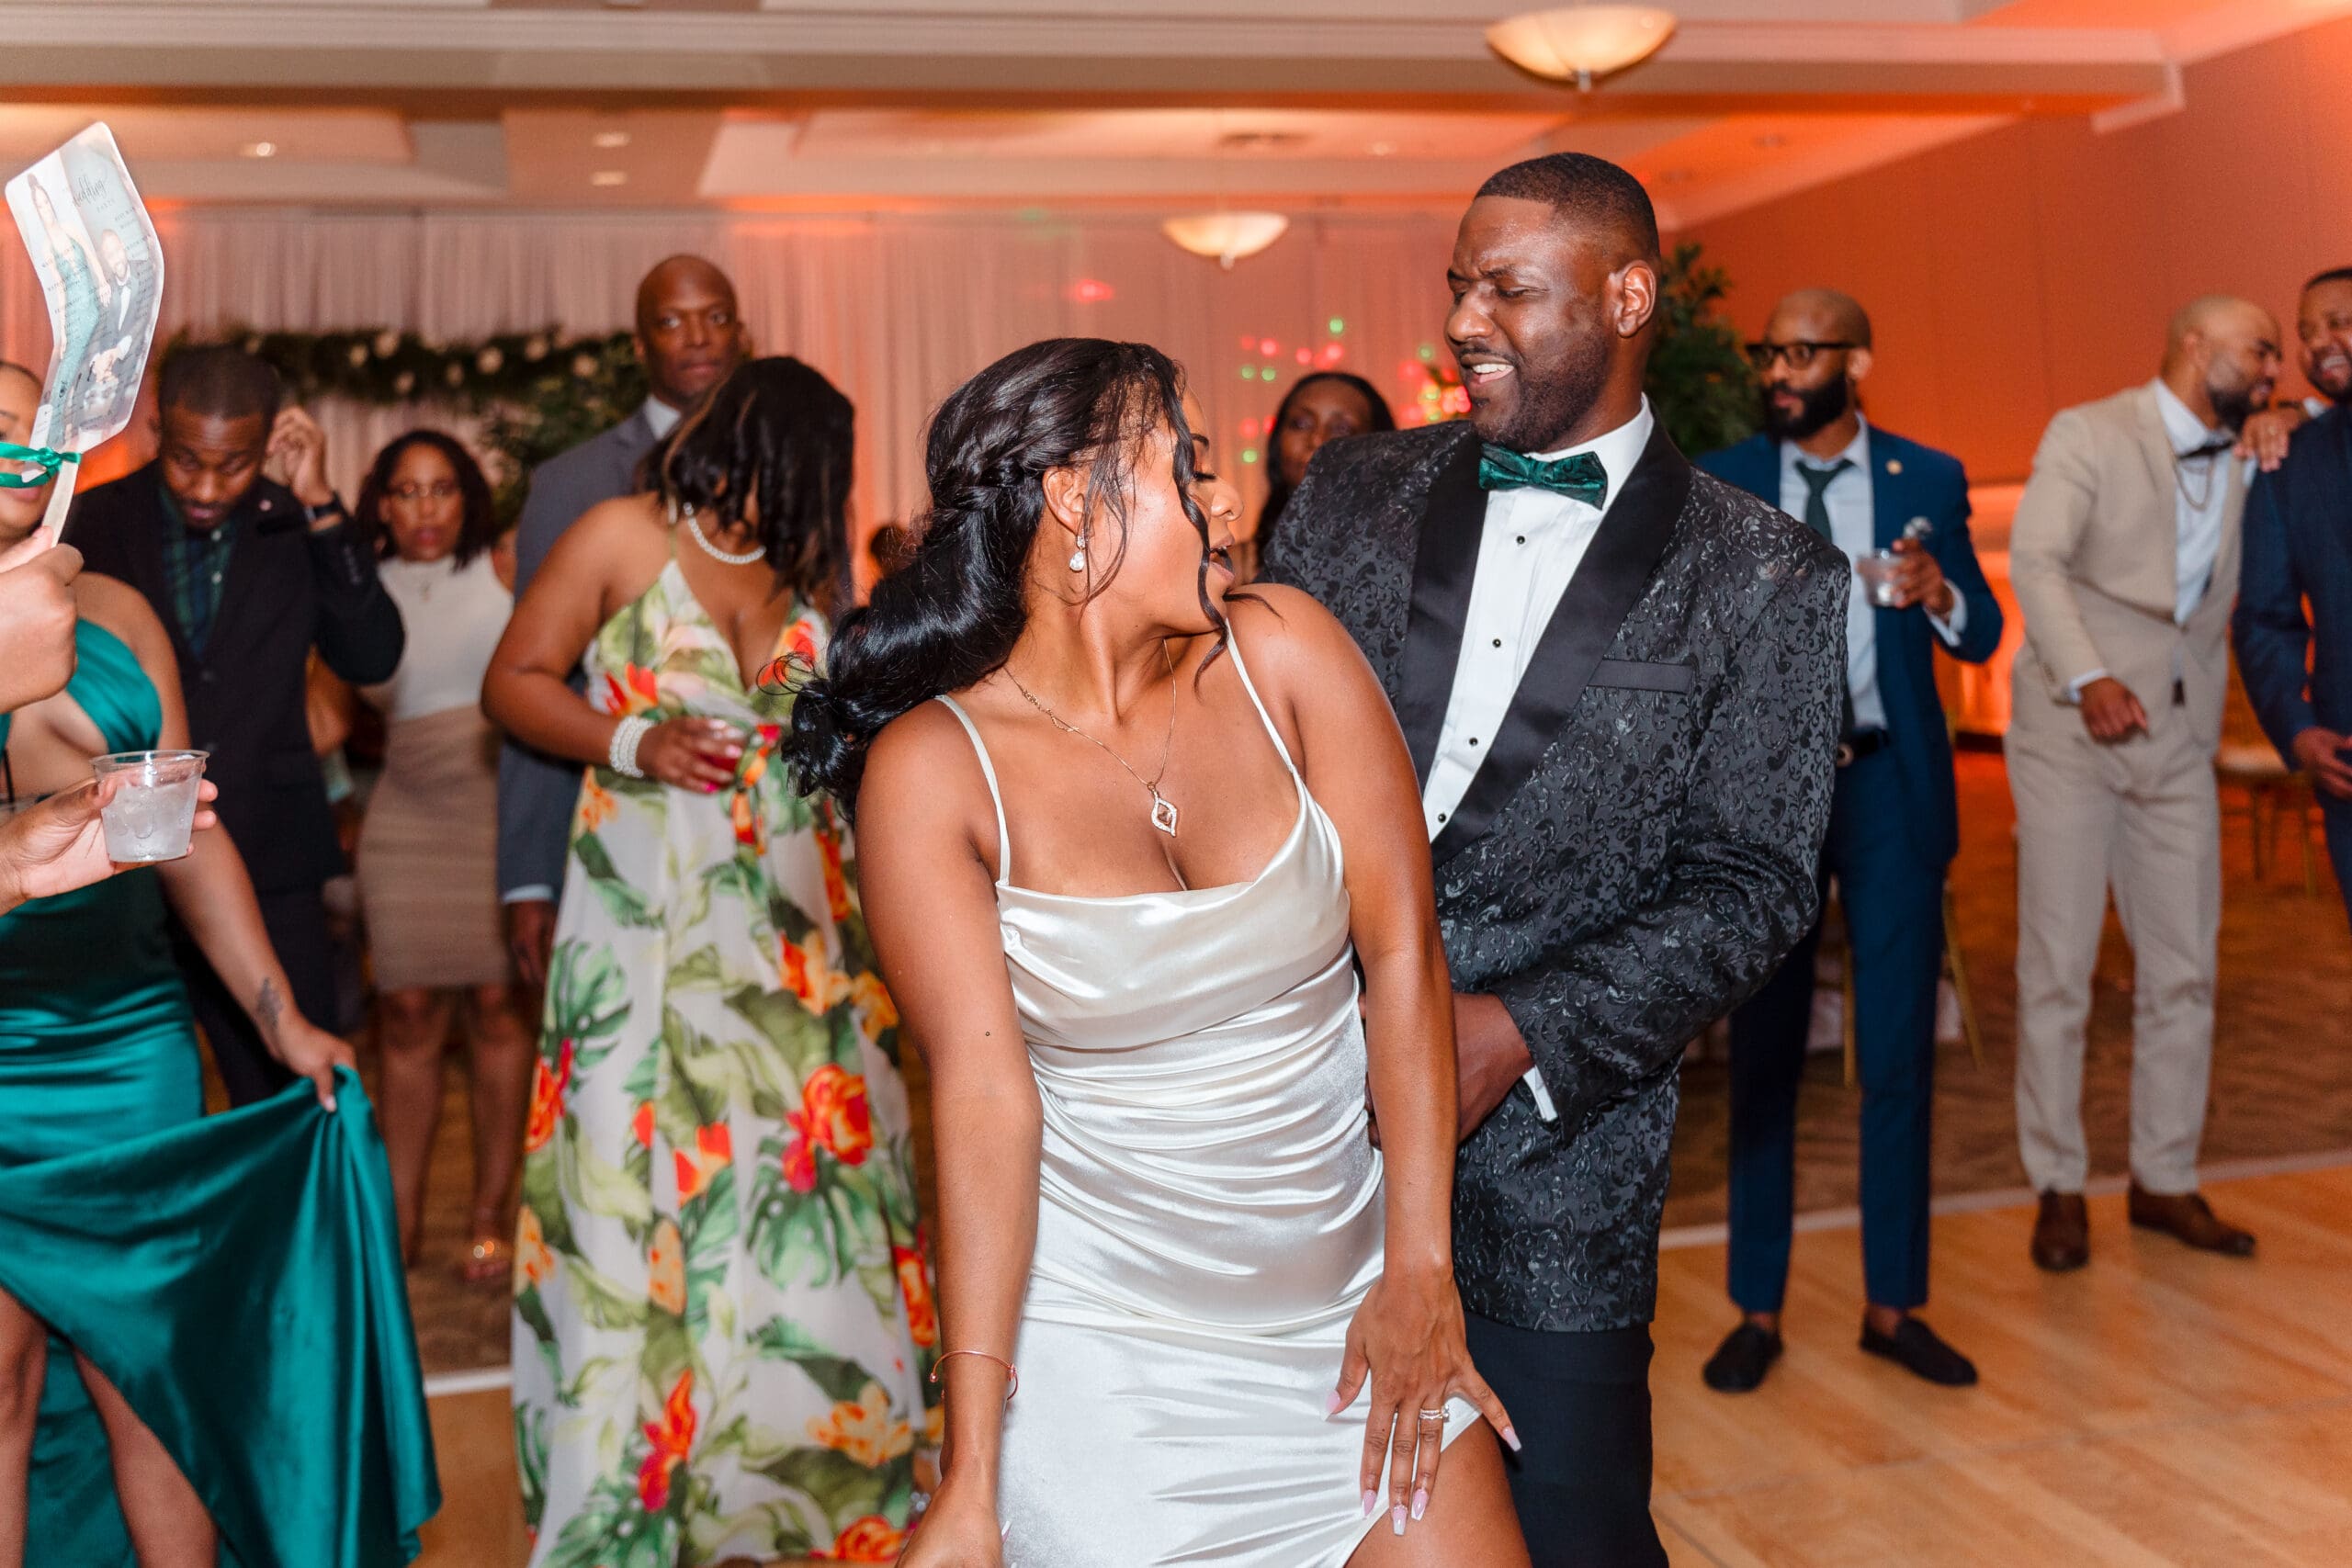 Lateisha and Glen dancing intimately at Ocoee Lakeshore Reception Center, showcasing their unique love and personalities.